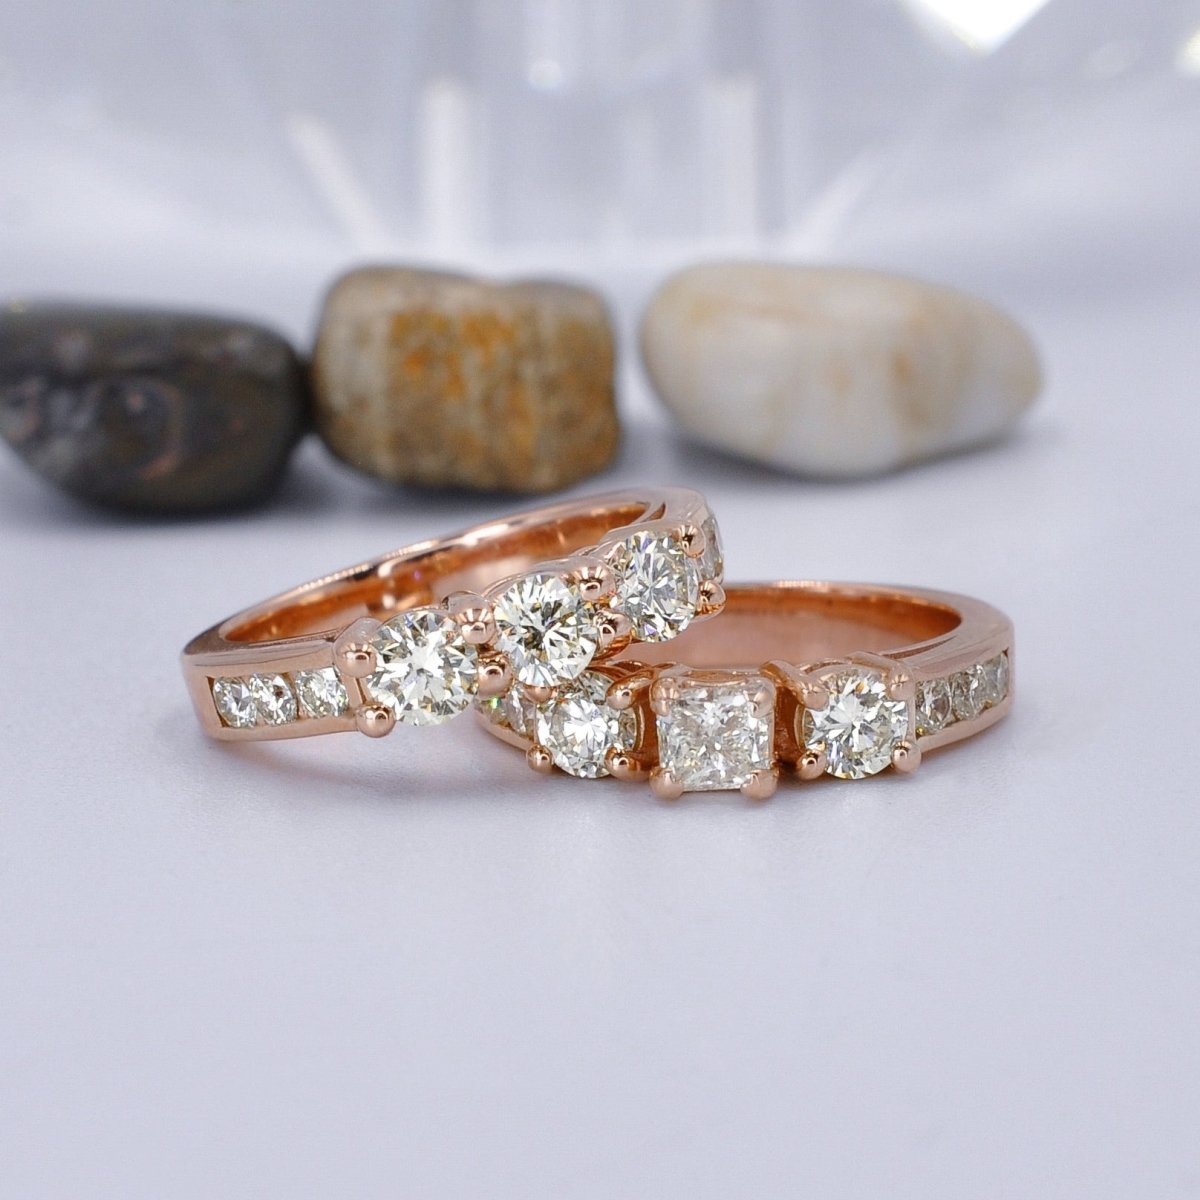 Breathtaking 2.15CT Princess and Round Cut Diamond Bridal Set in 14KT Rose Gold - Primestyle.com